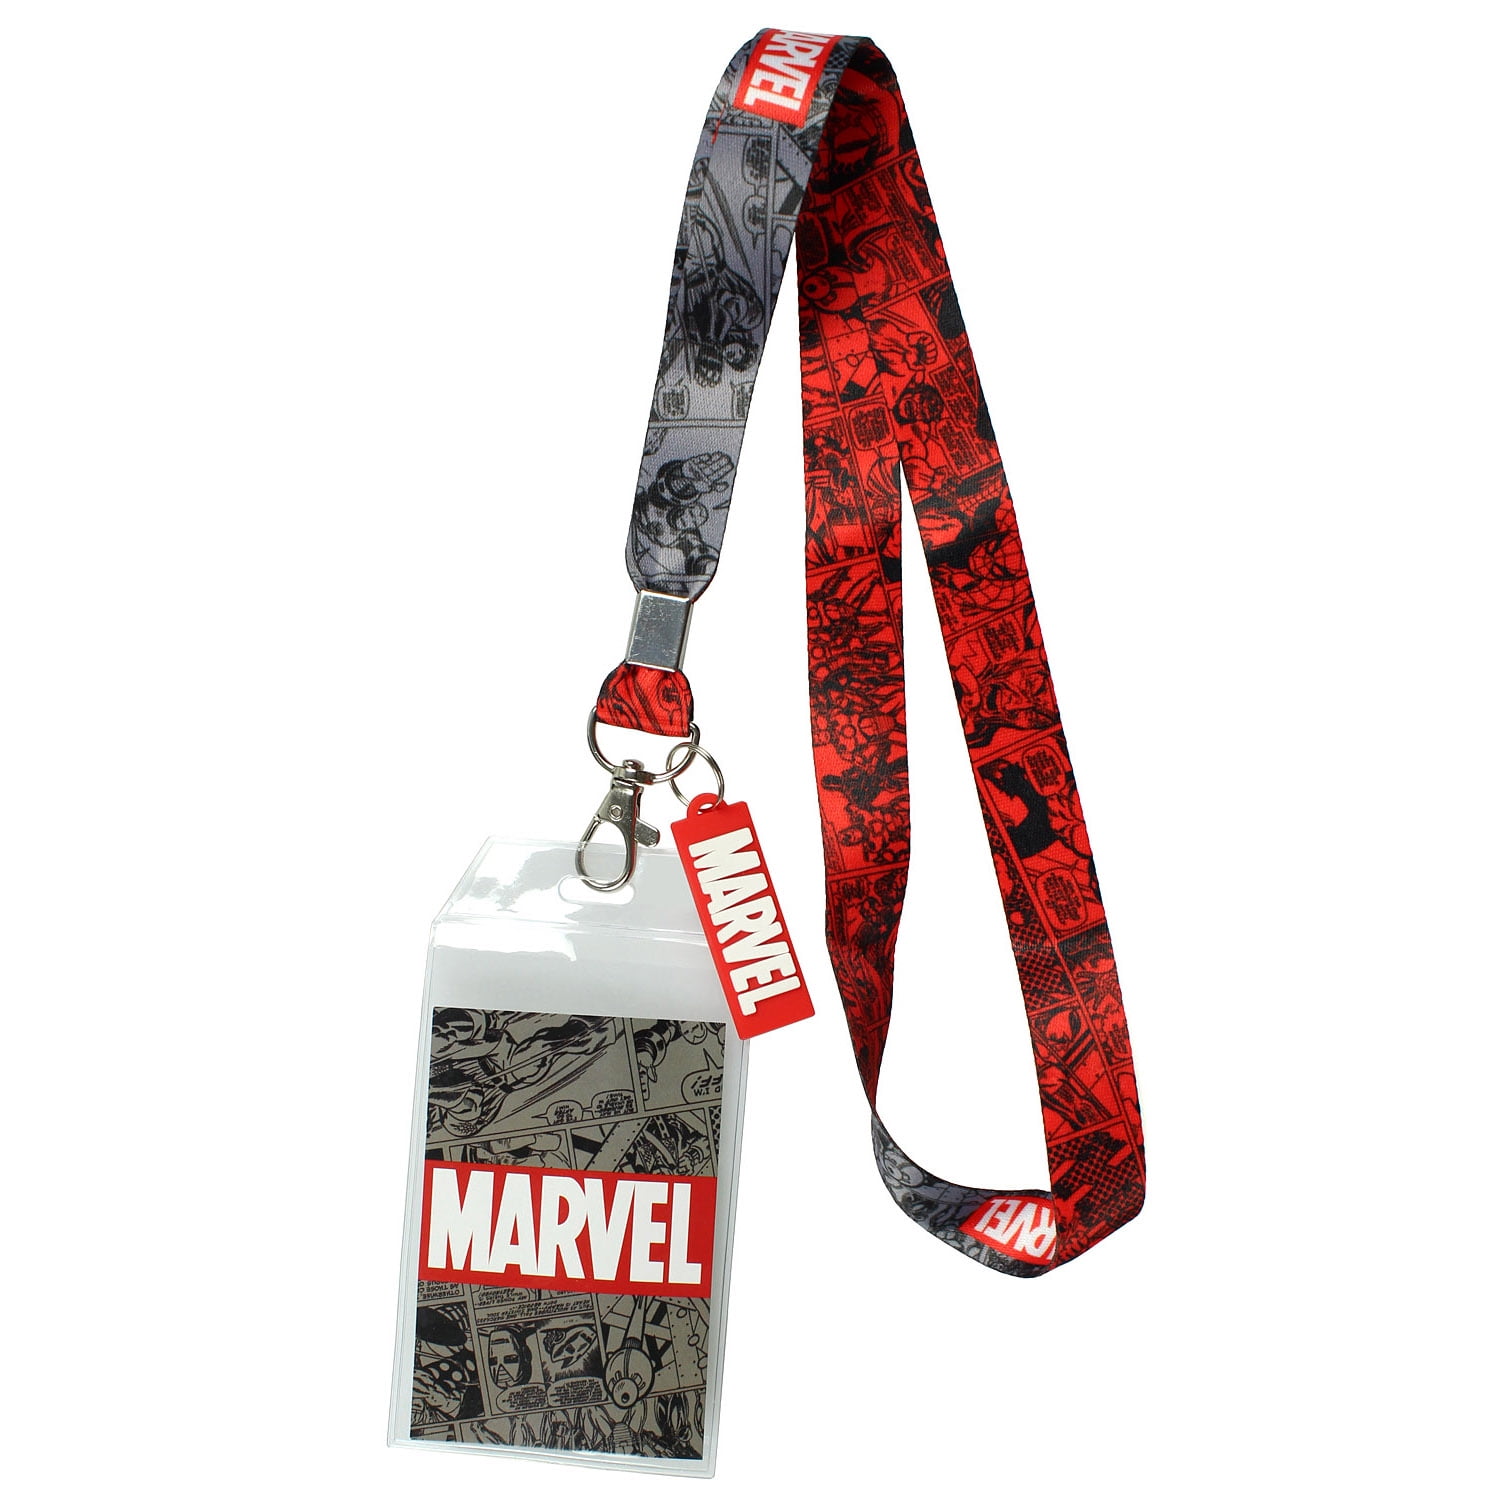 Marvel Lanyard ID Badge Holder And 2 Rubber Charm Pendant With